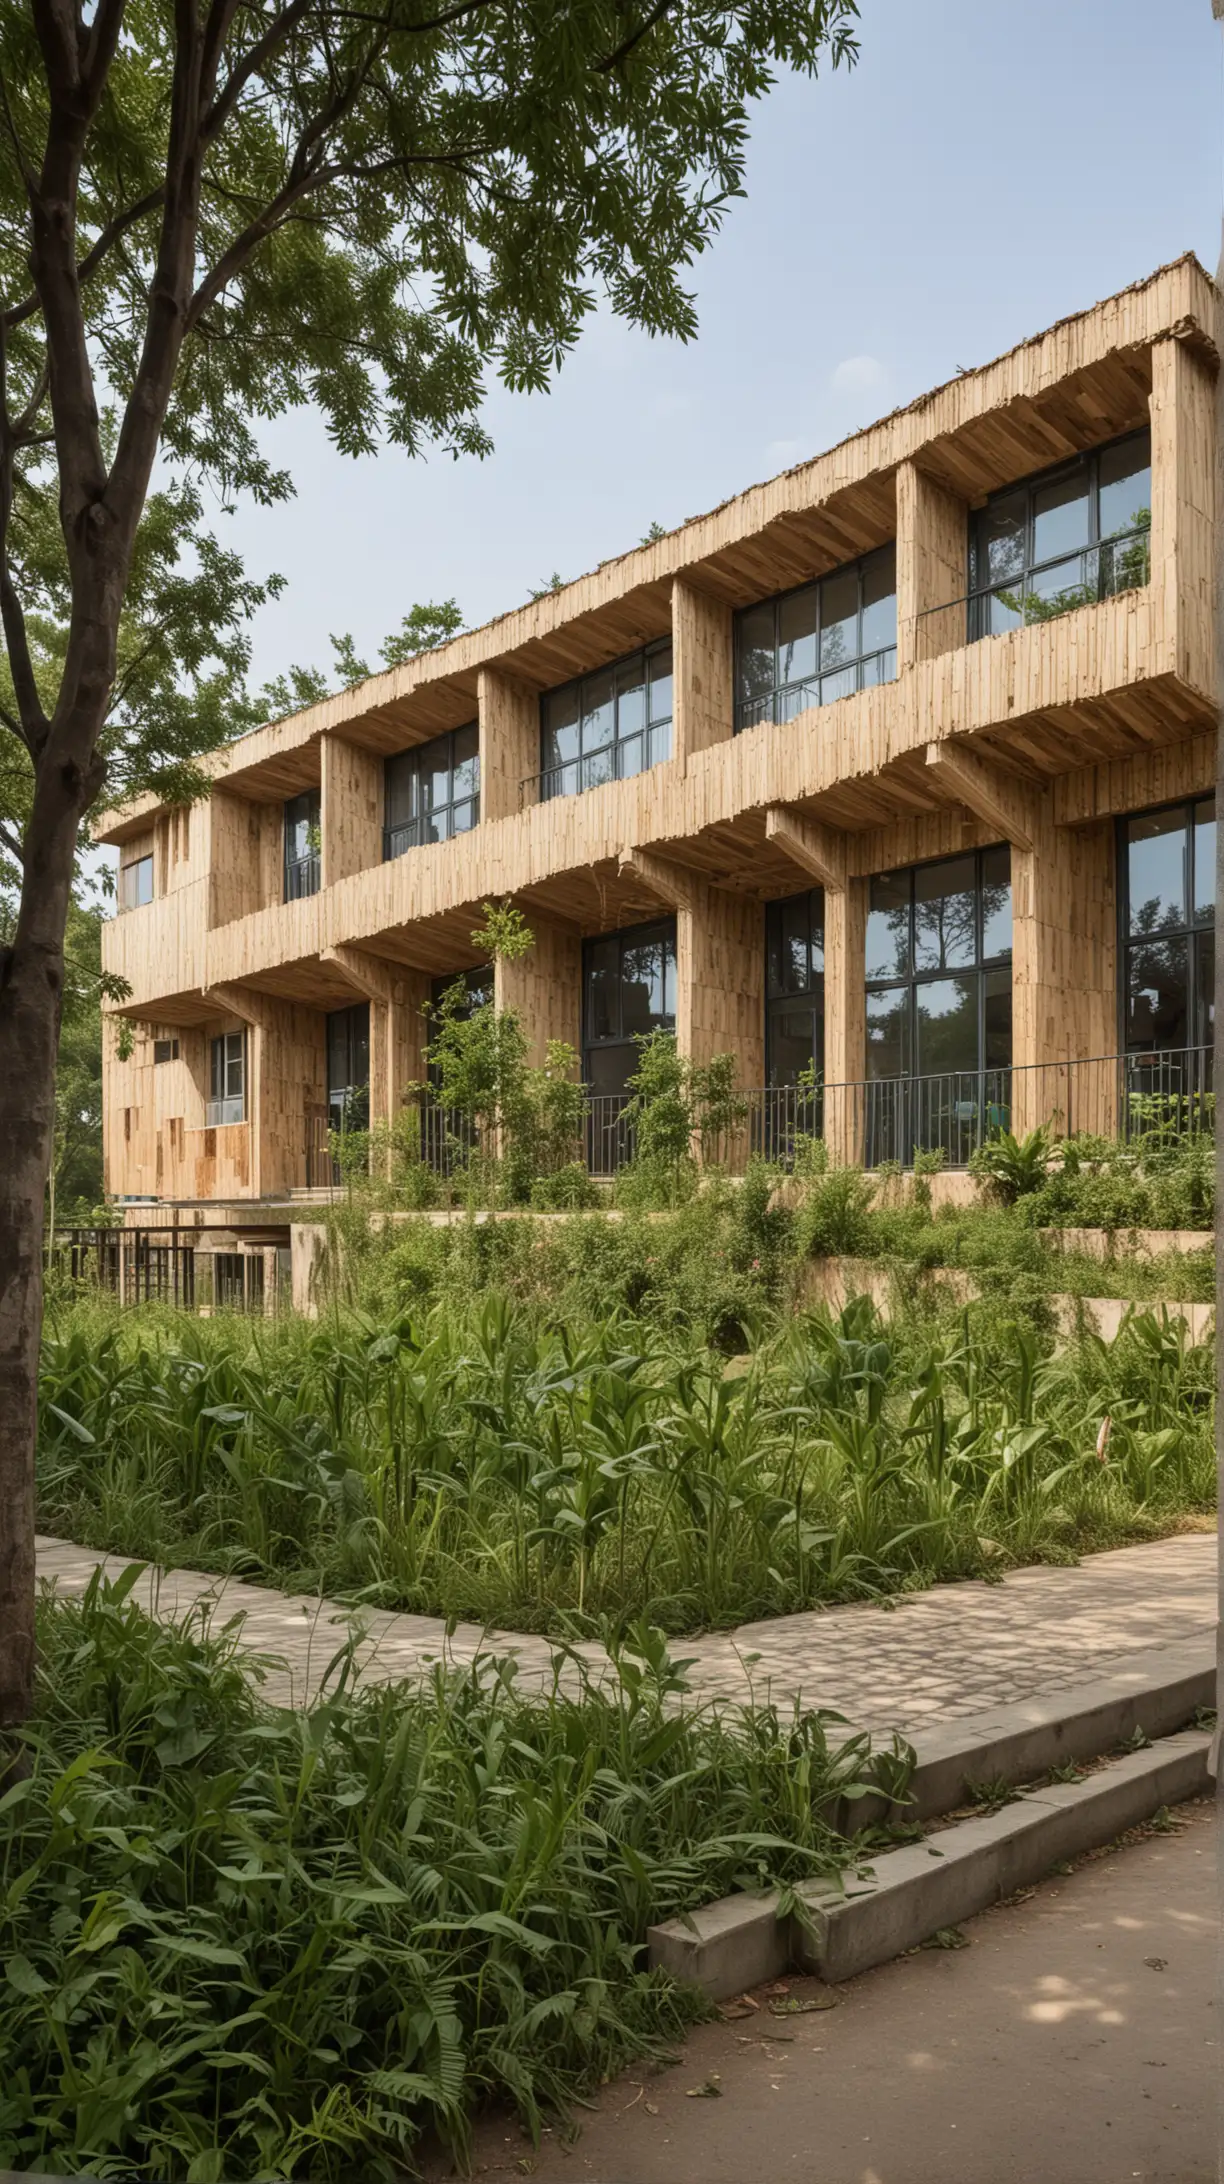 this school  is clad in recycled materials and surrounded by greenery

